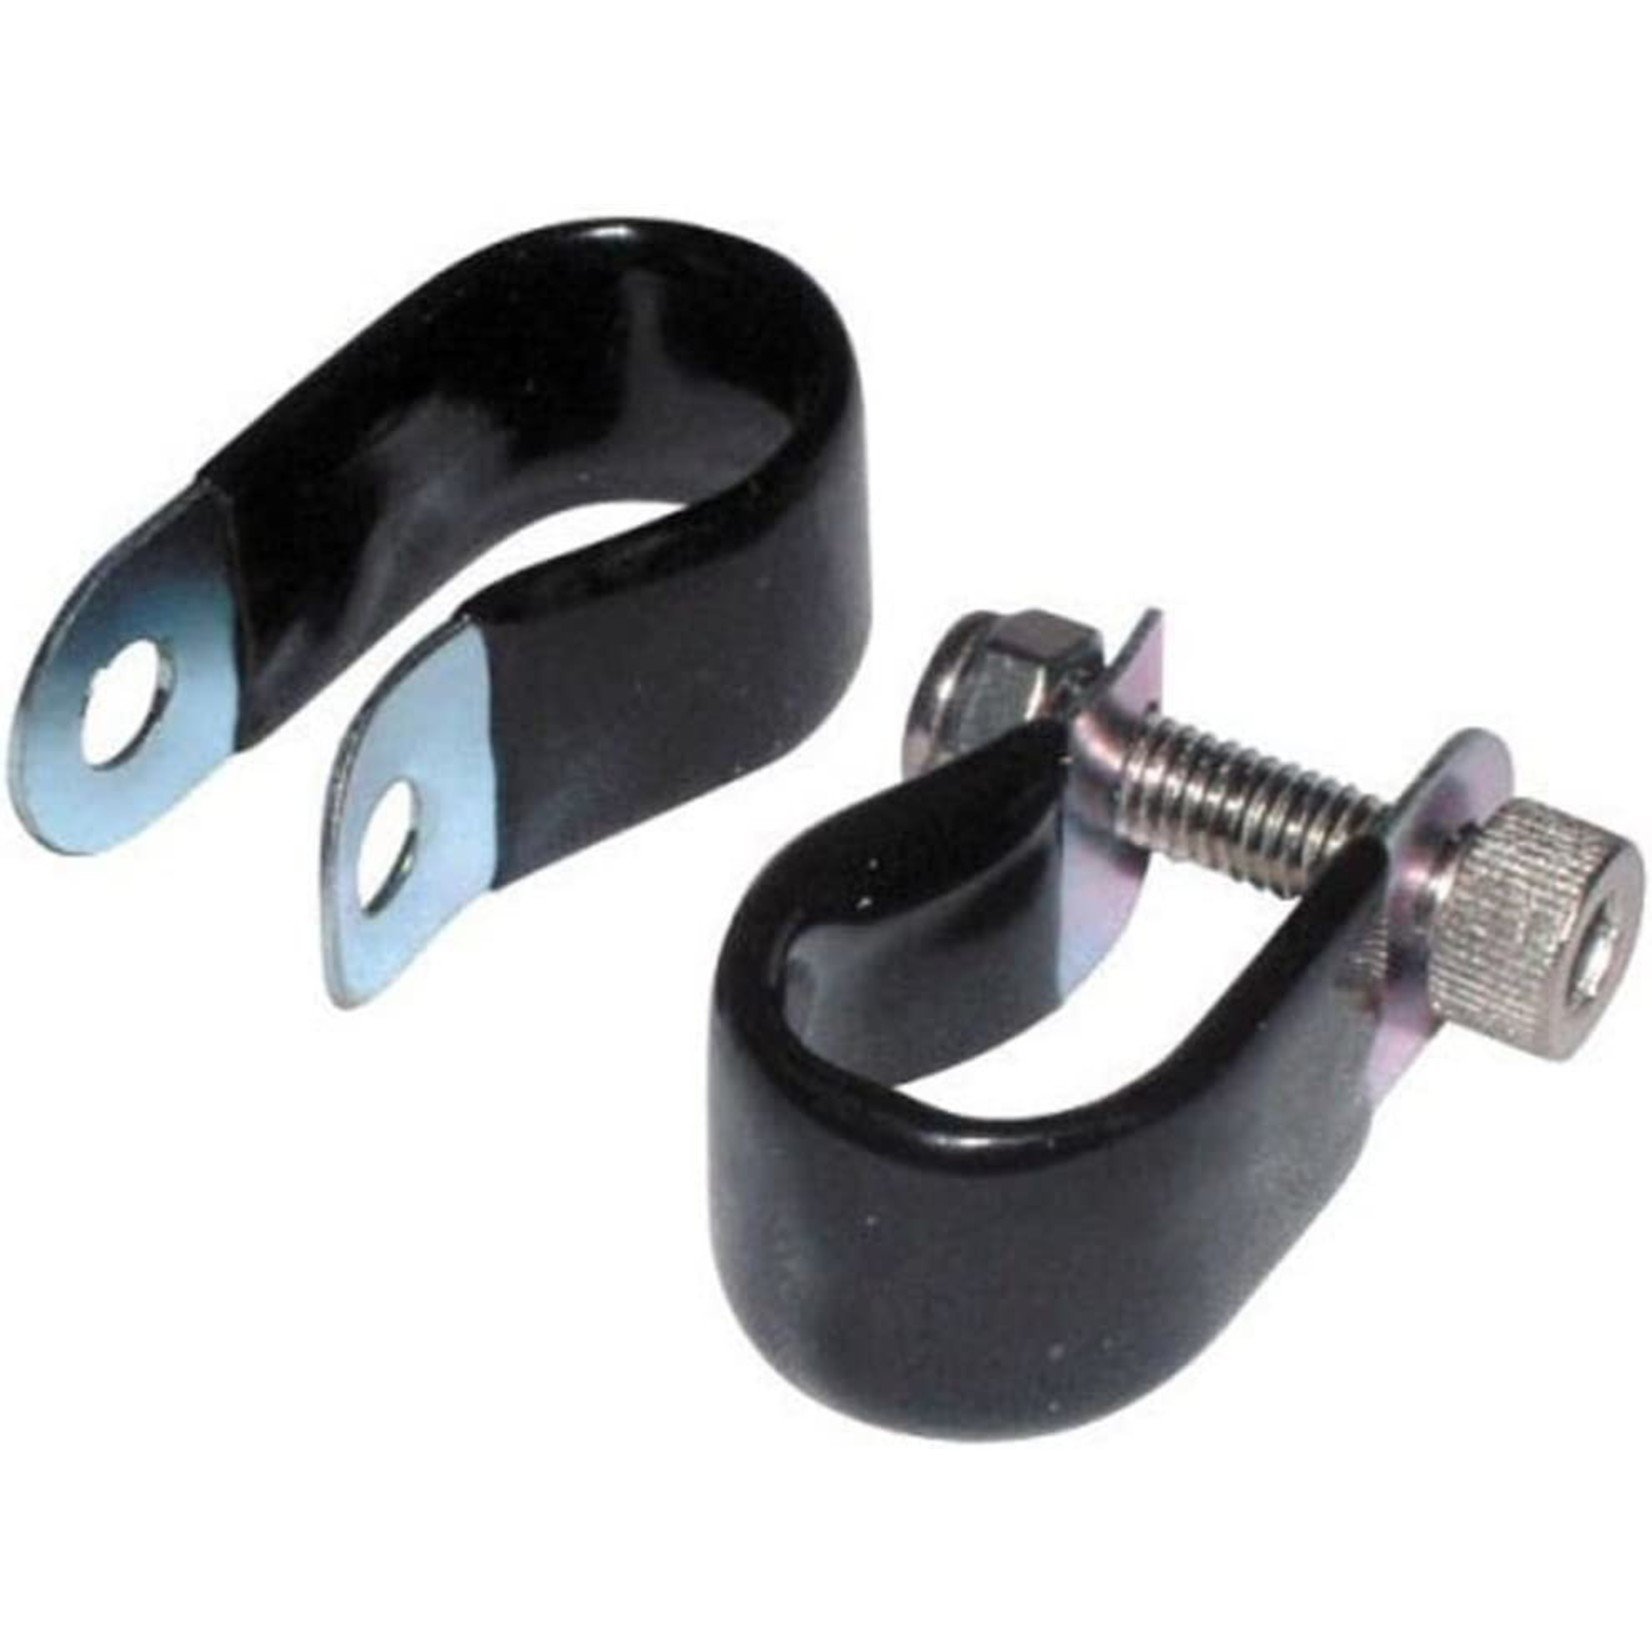 Tortec P-CLIPS for Stay Mudguards